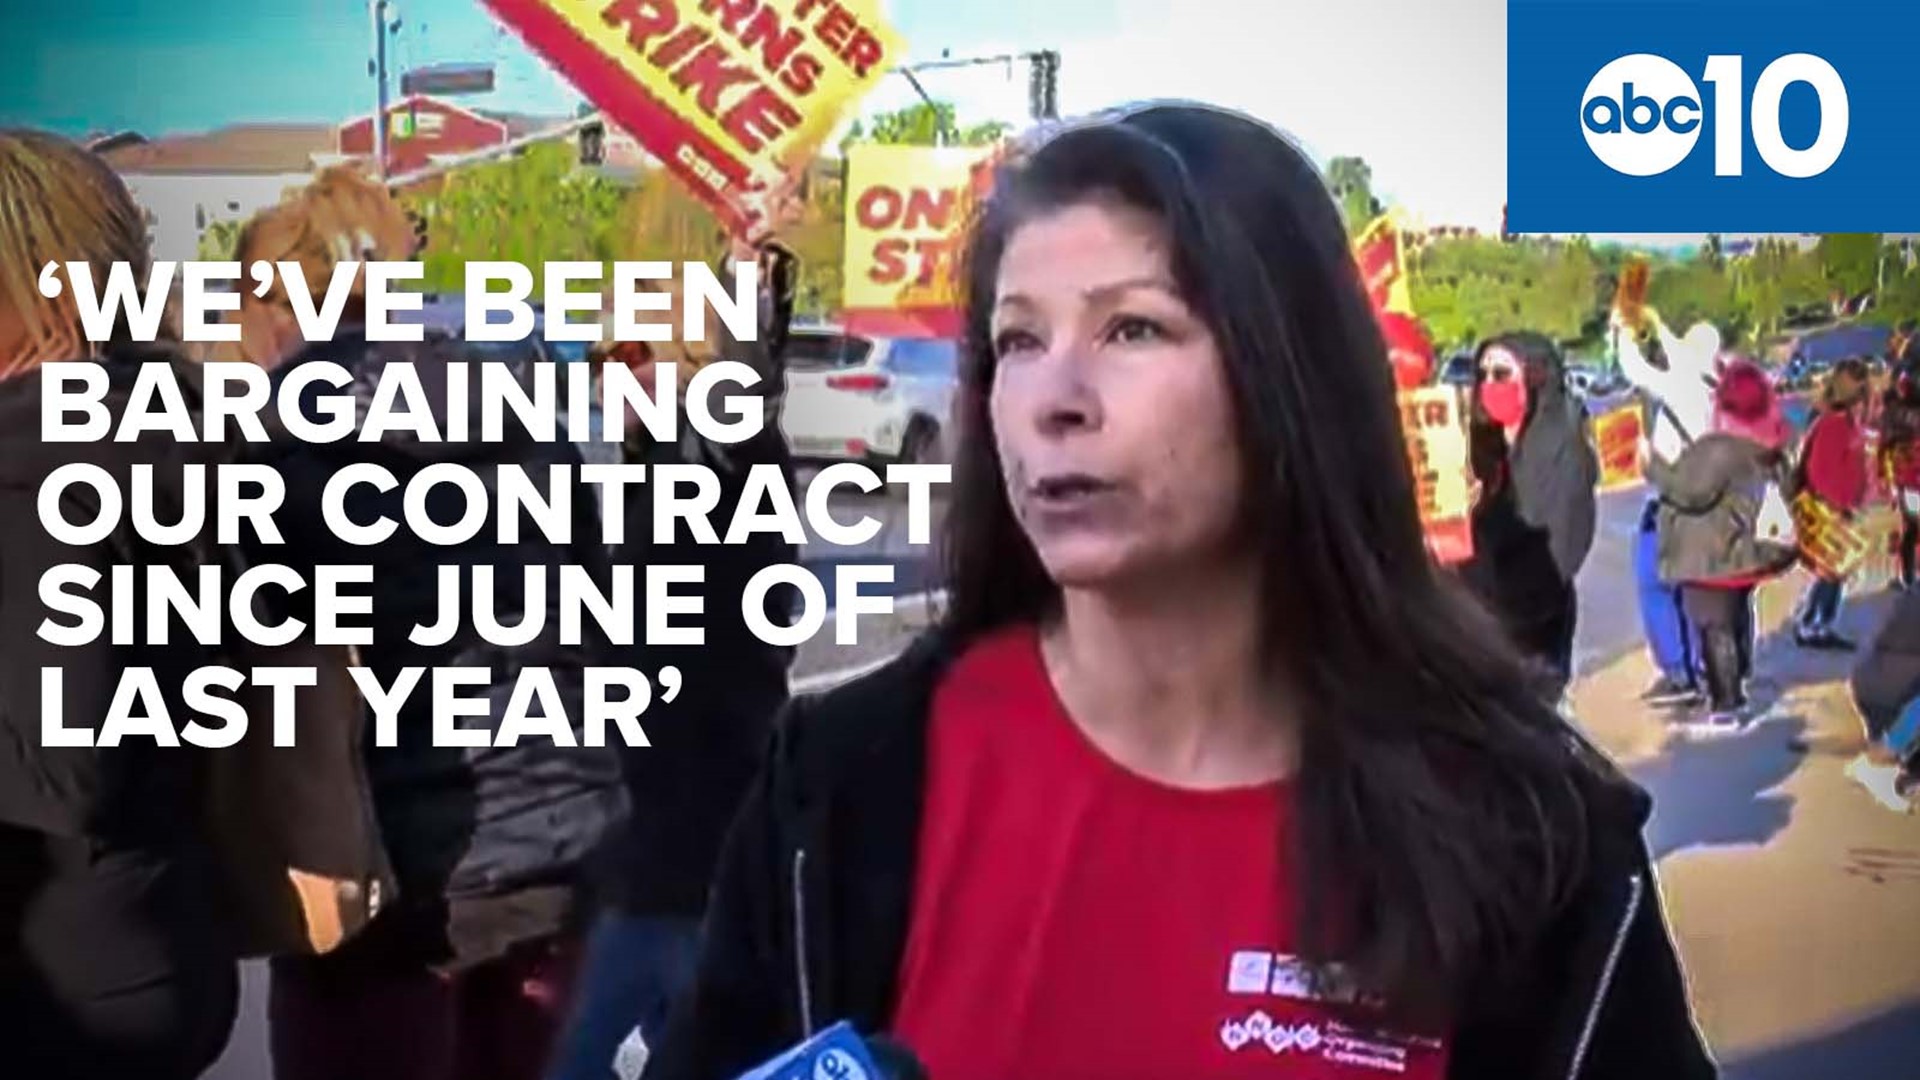 We spoke with healthcare workers and staff who said they have been negotiating their contracts since June of last year, and now they're striking.